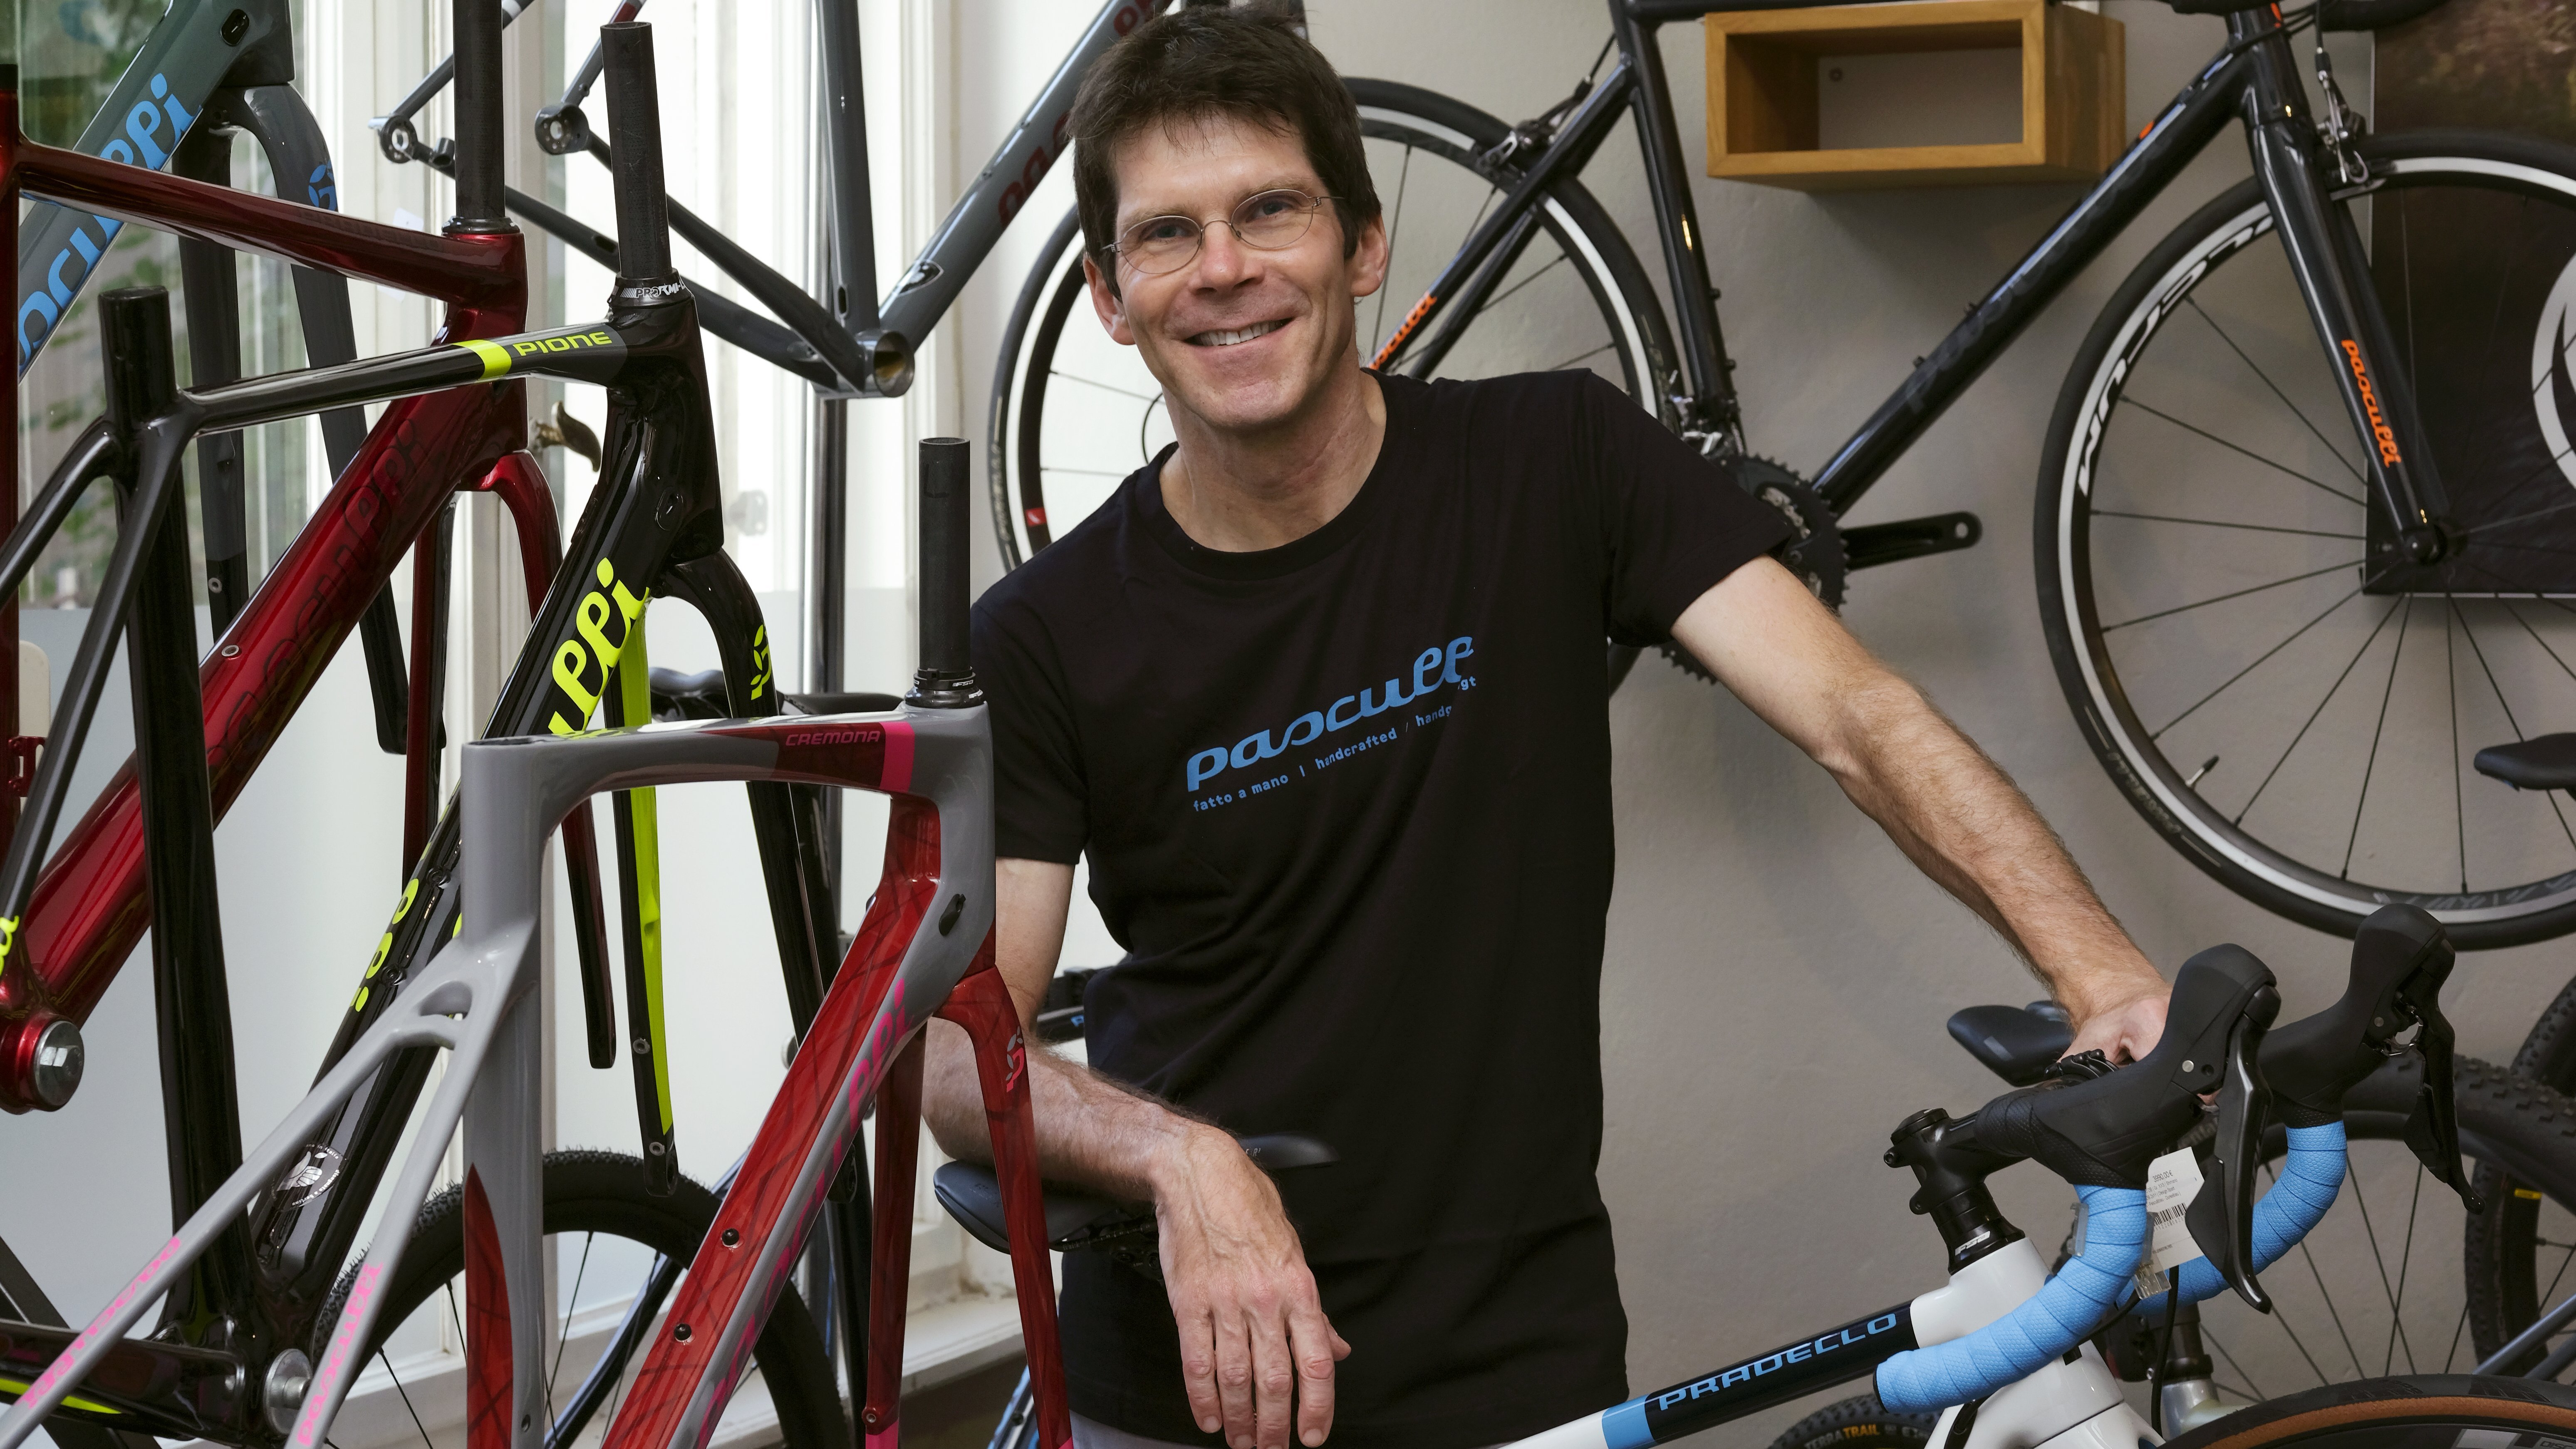 Christoph Hartmann in front of his bicycle